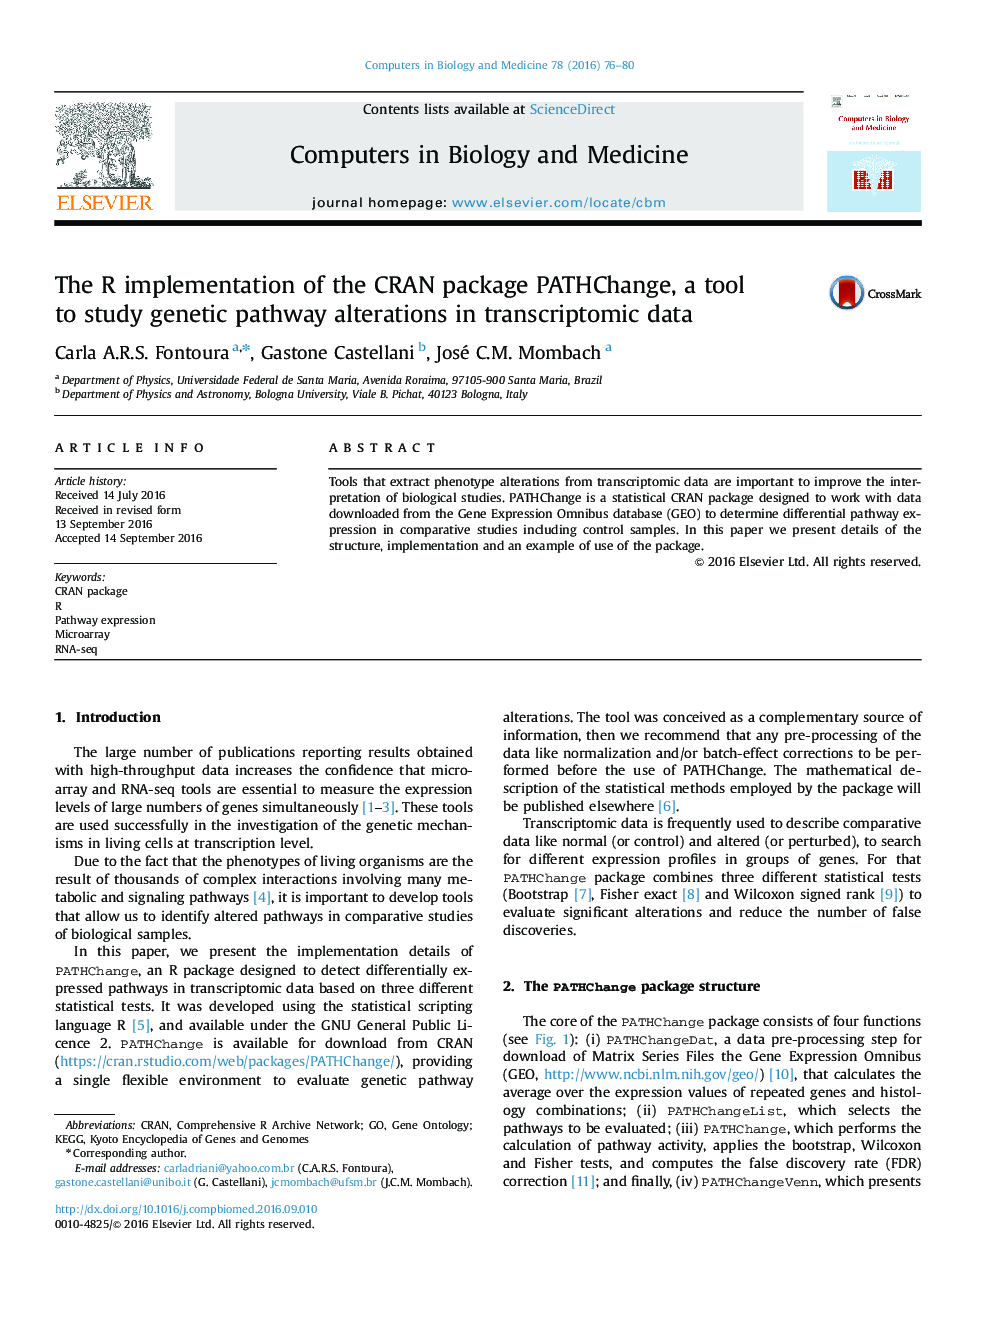 The R implementation of the CRAN package PATHChange, a tool to study genetic pathway alterations in transcriptomic data